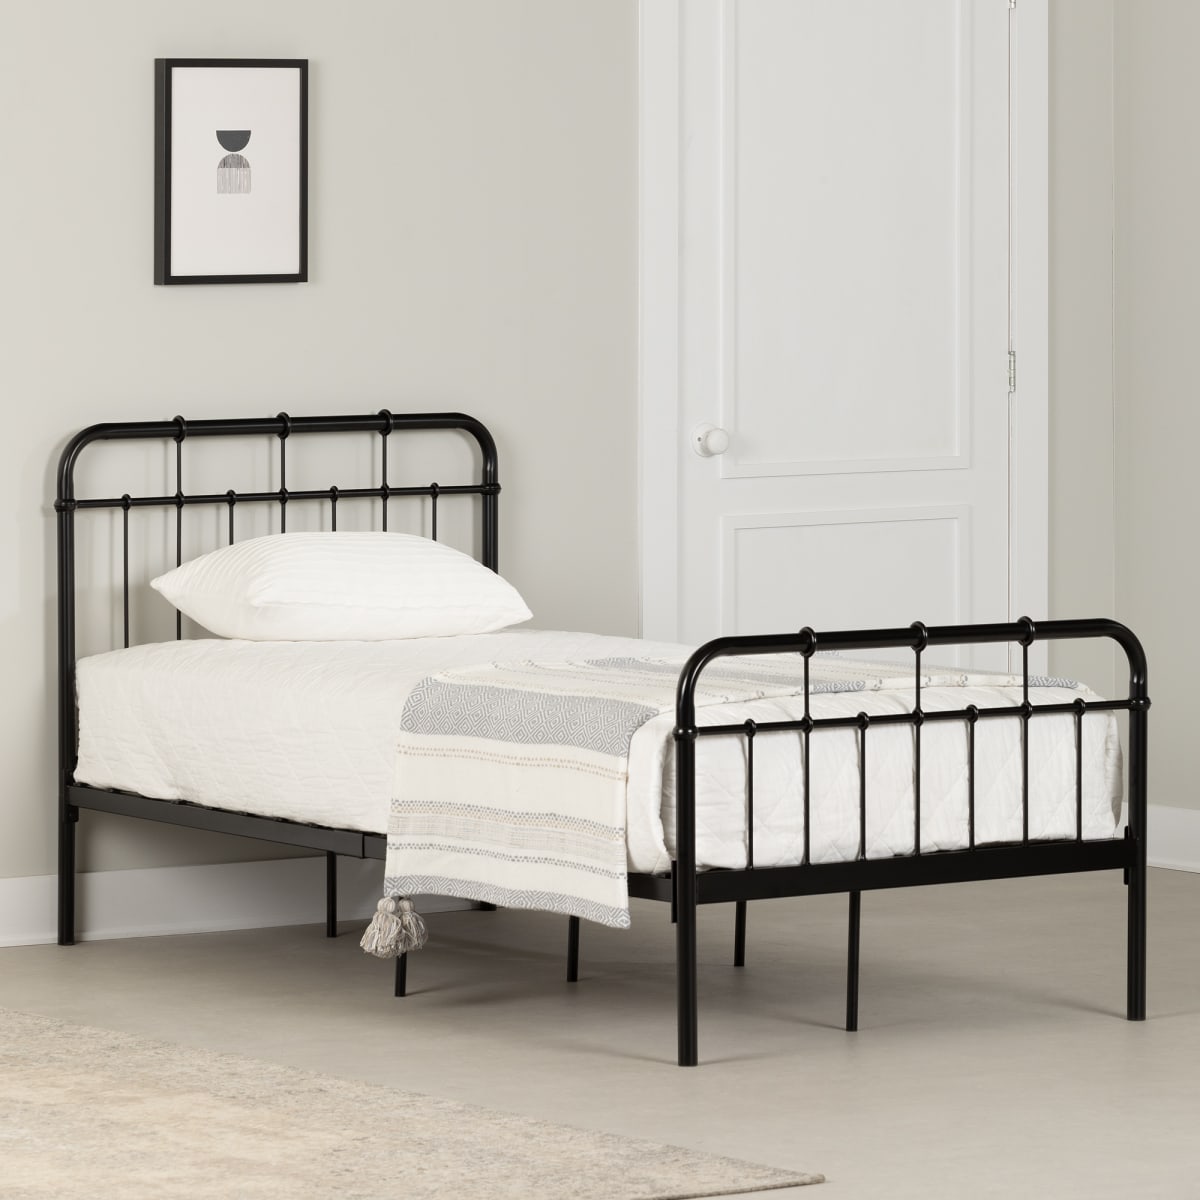 - Metal Complete Bed | | Collections | Products | South Shore Furniture (US) - Furniture for sale designed and manufactured in America